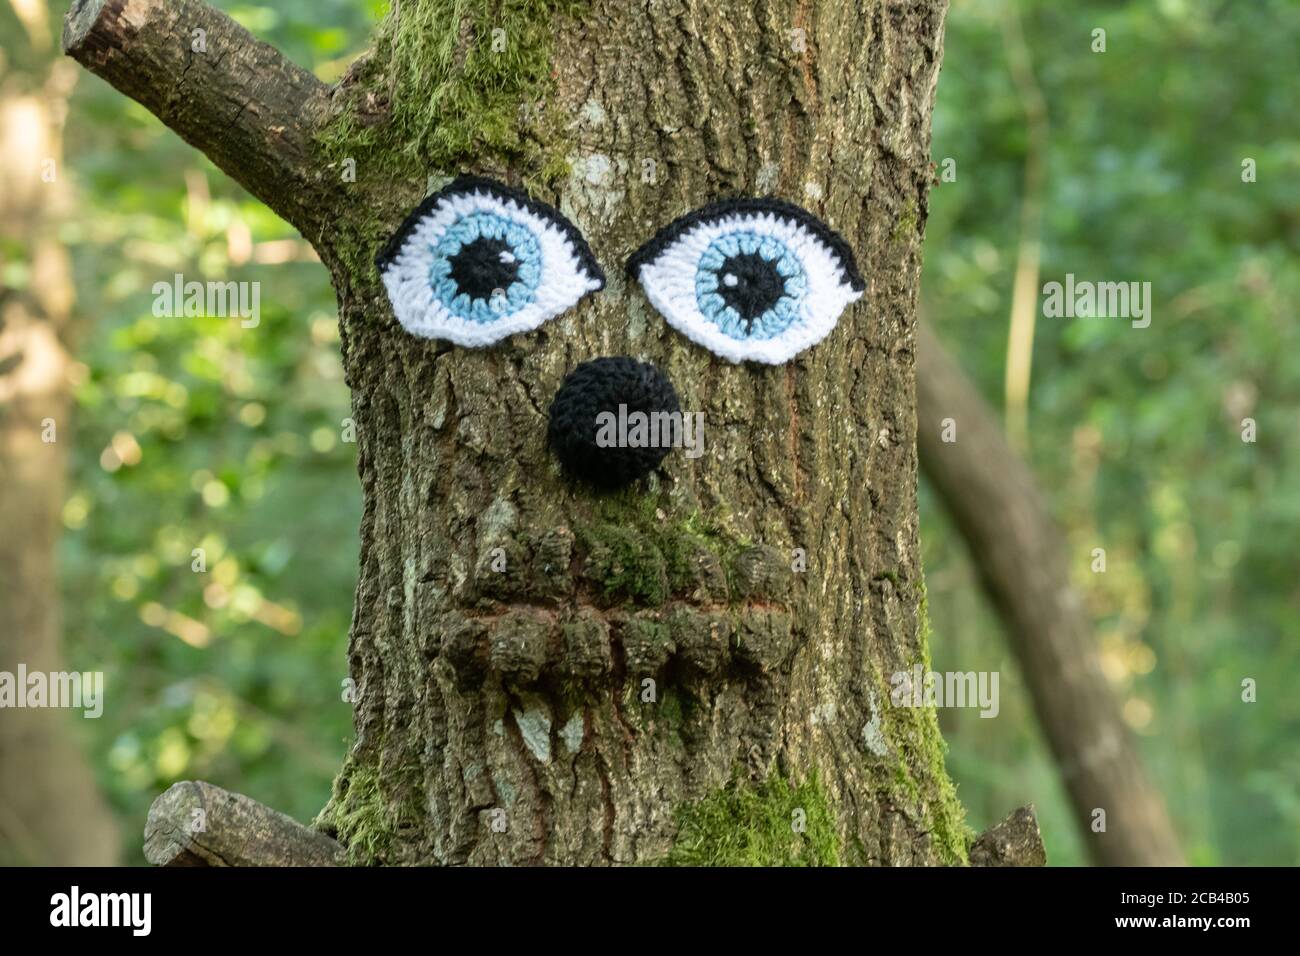 Funny face on a tree trunk made with crochet eyes and nose during the coronavirus covid-19 lockdown Stock Photo